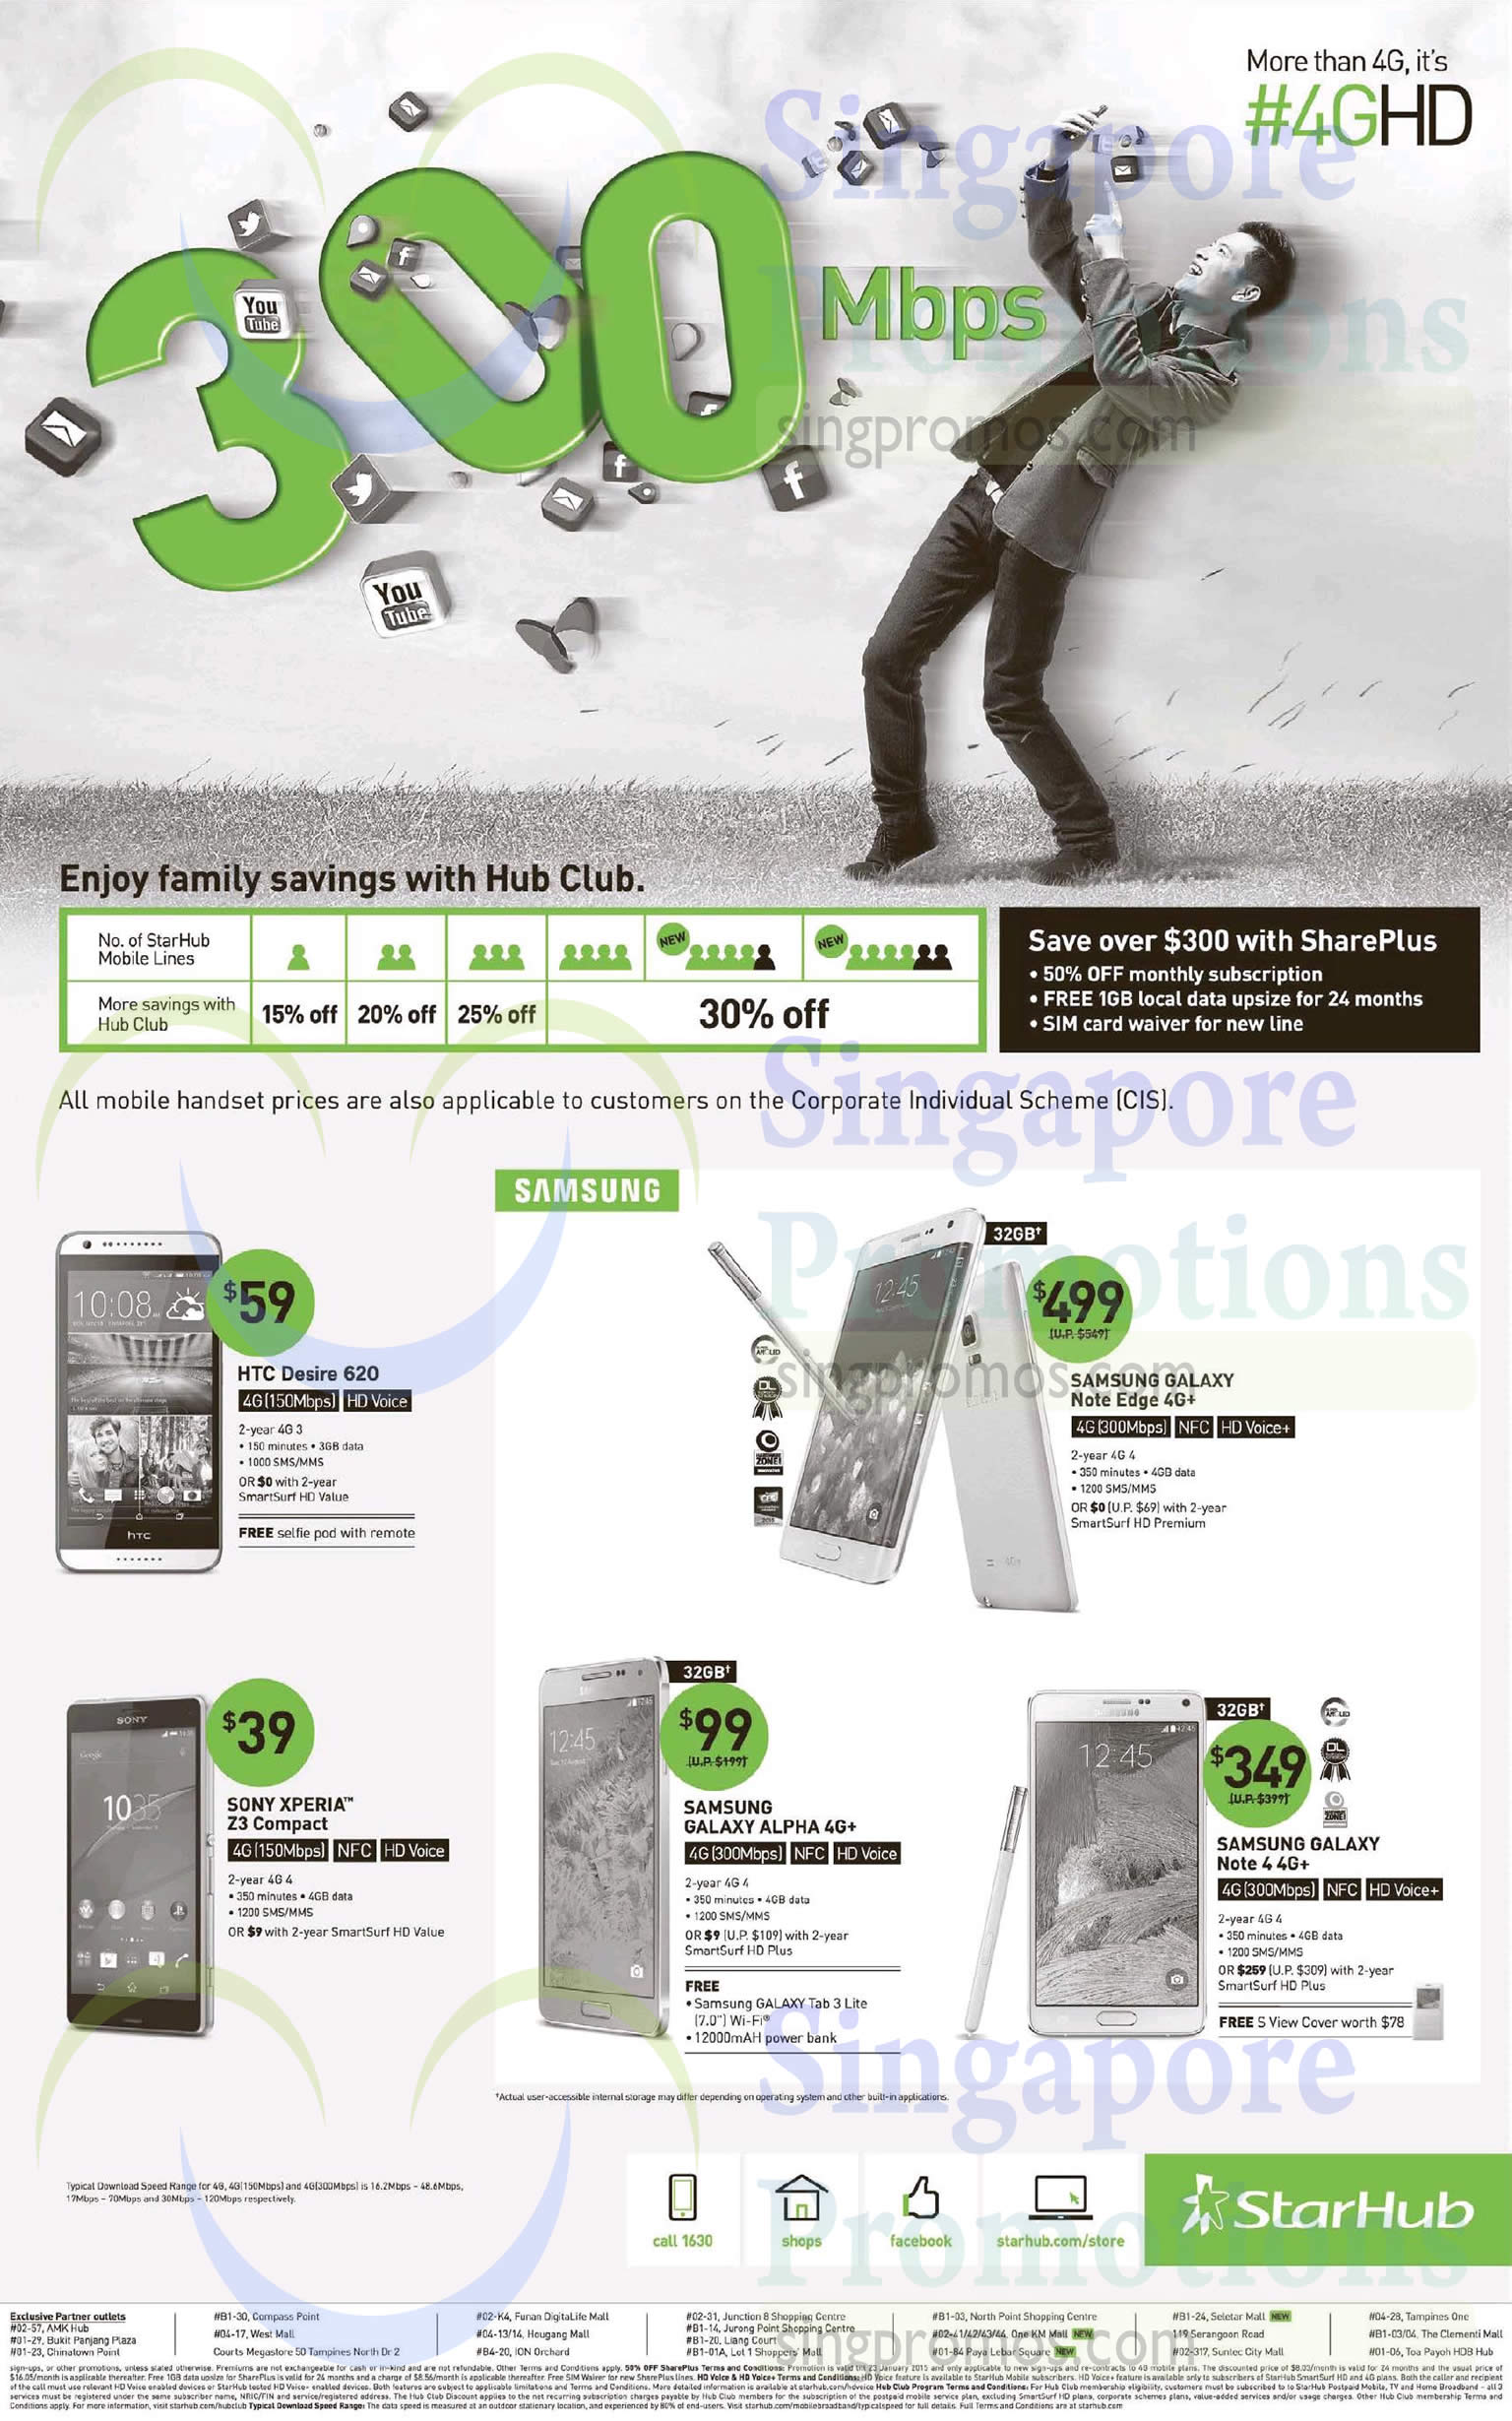 Featured image for Starhub Smartphones, Tablets, Cable TV & Broadband Offers 17 - 23 Jan 2015